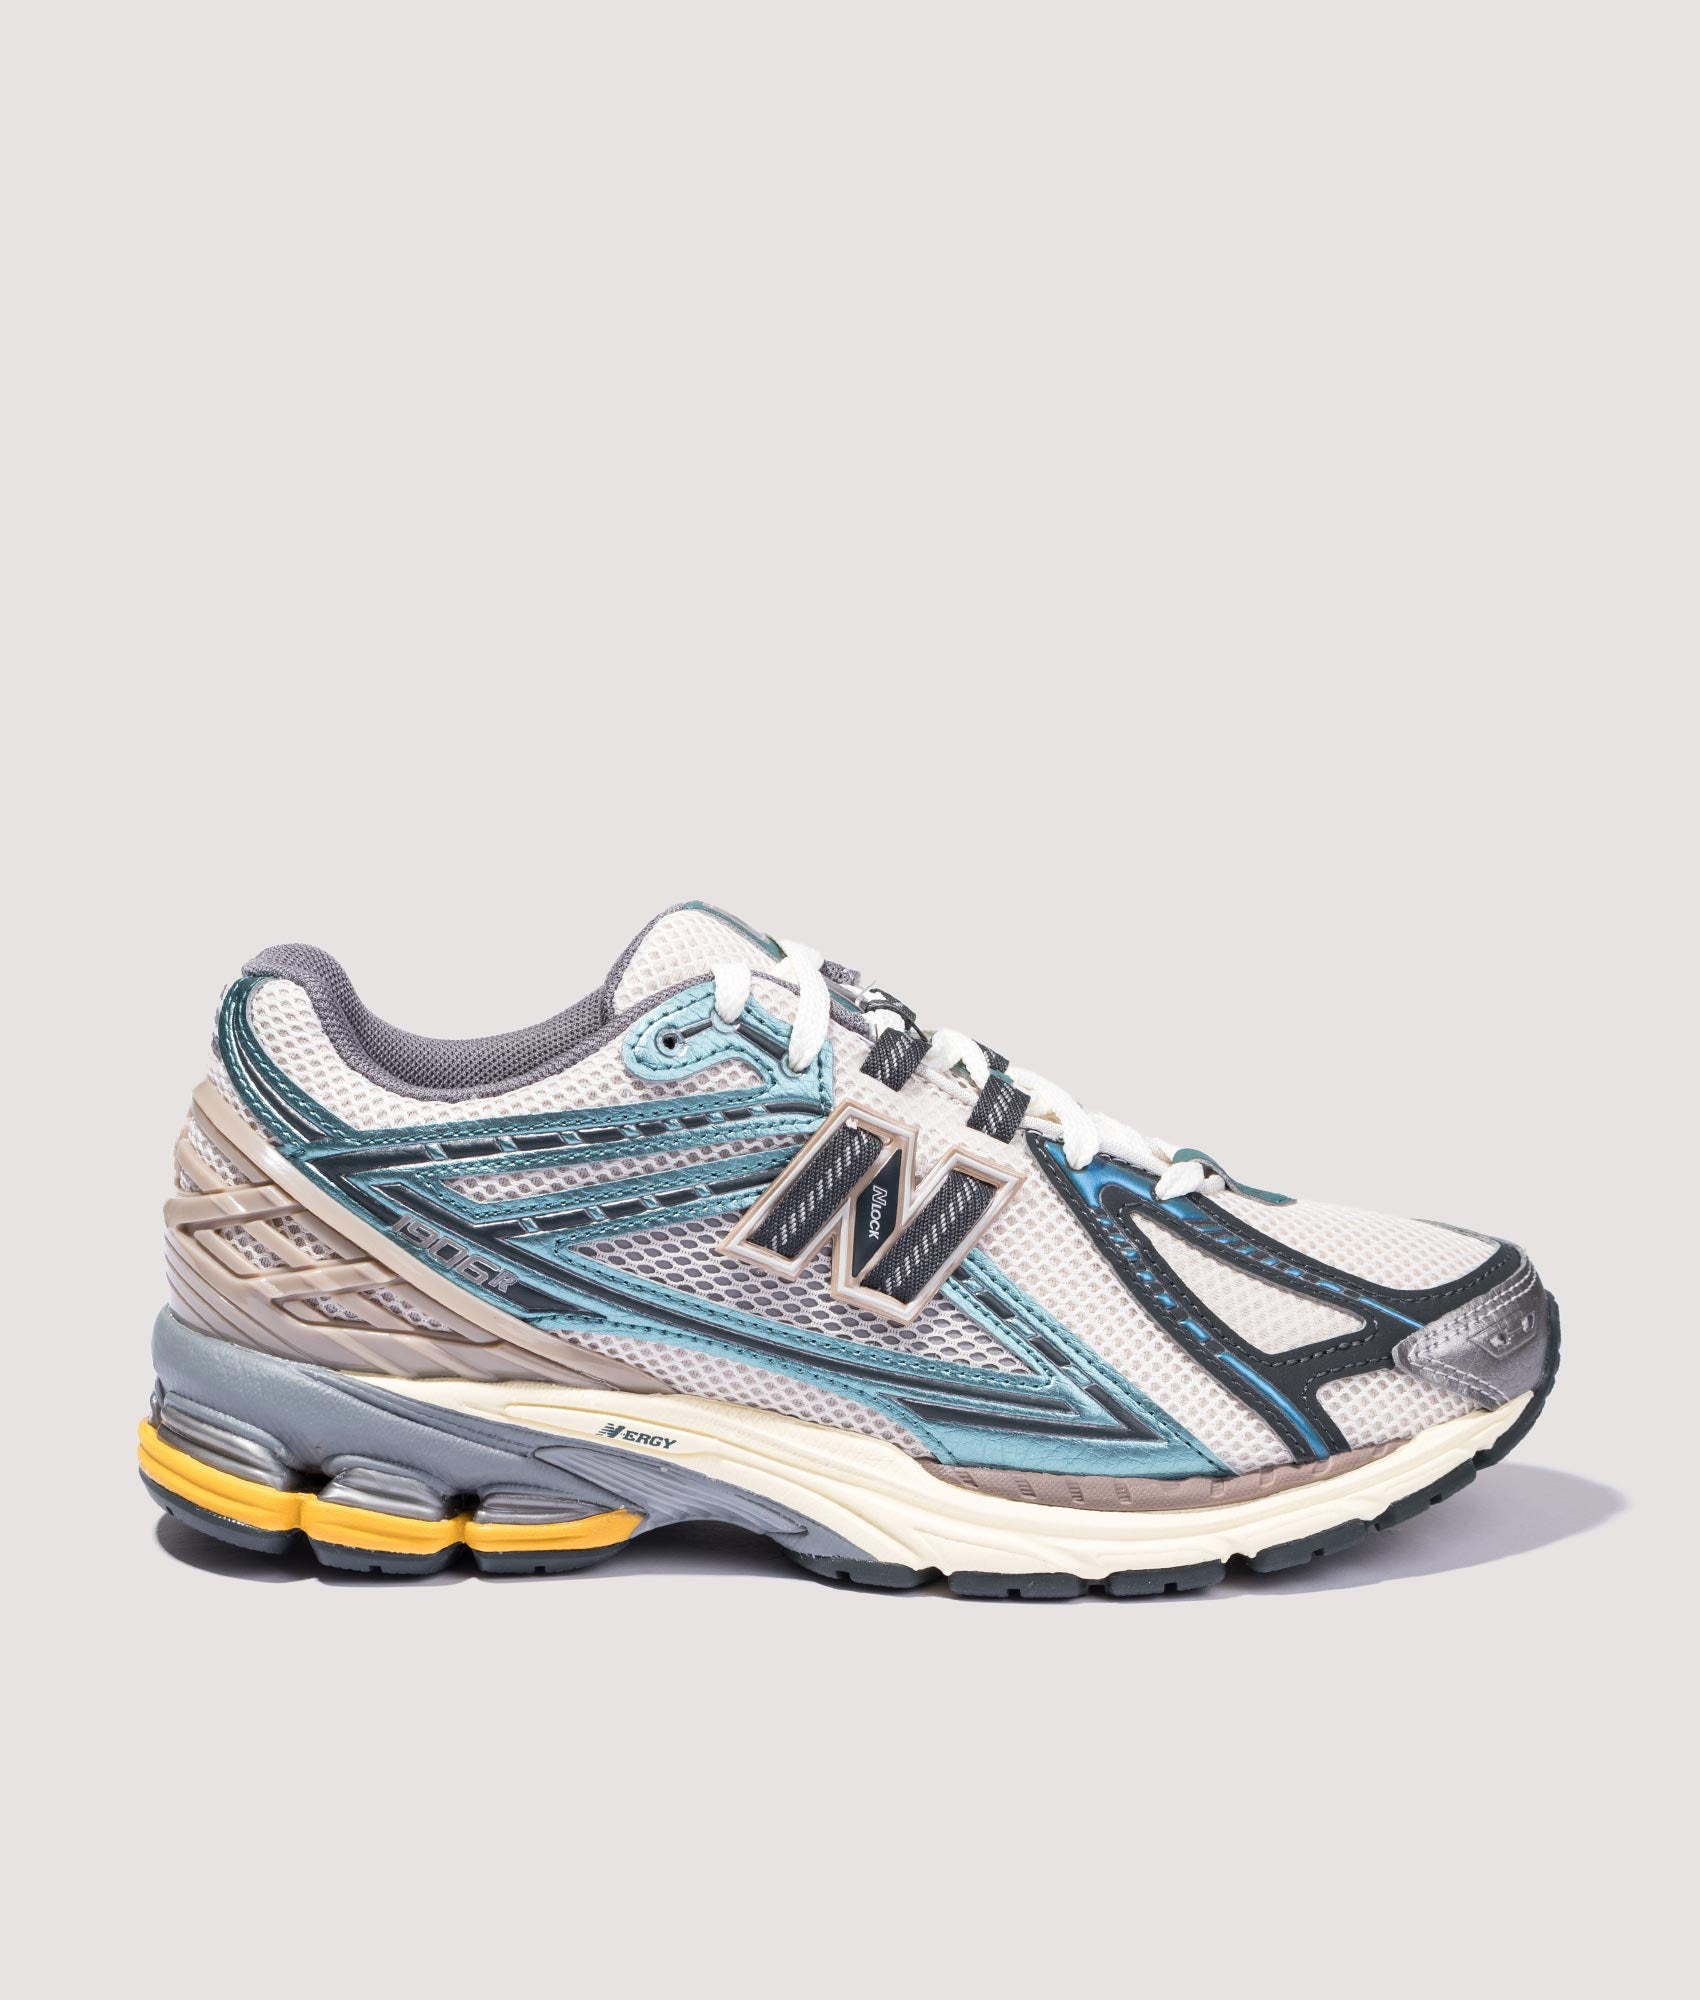 New Balance Mens 1906R Sneakers - Colour: M1906RRC New Spruce/Moonbeam/Driftwood - Size: 7.5